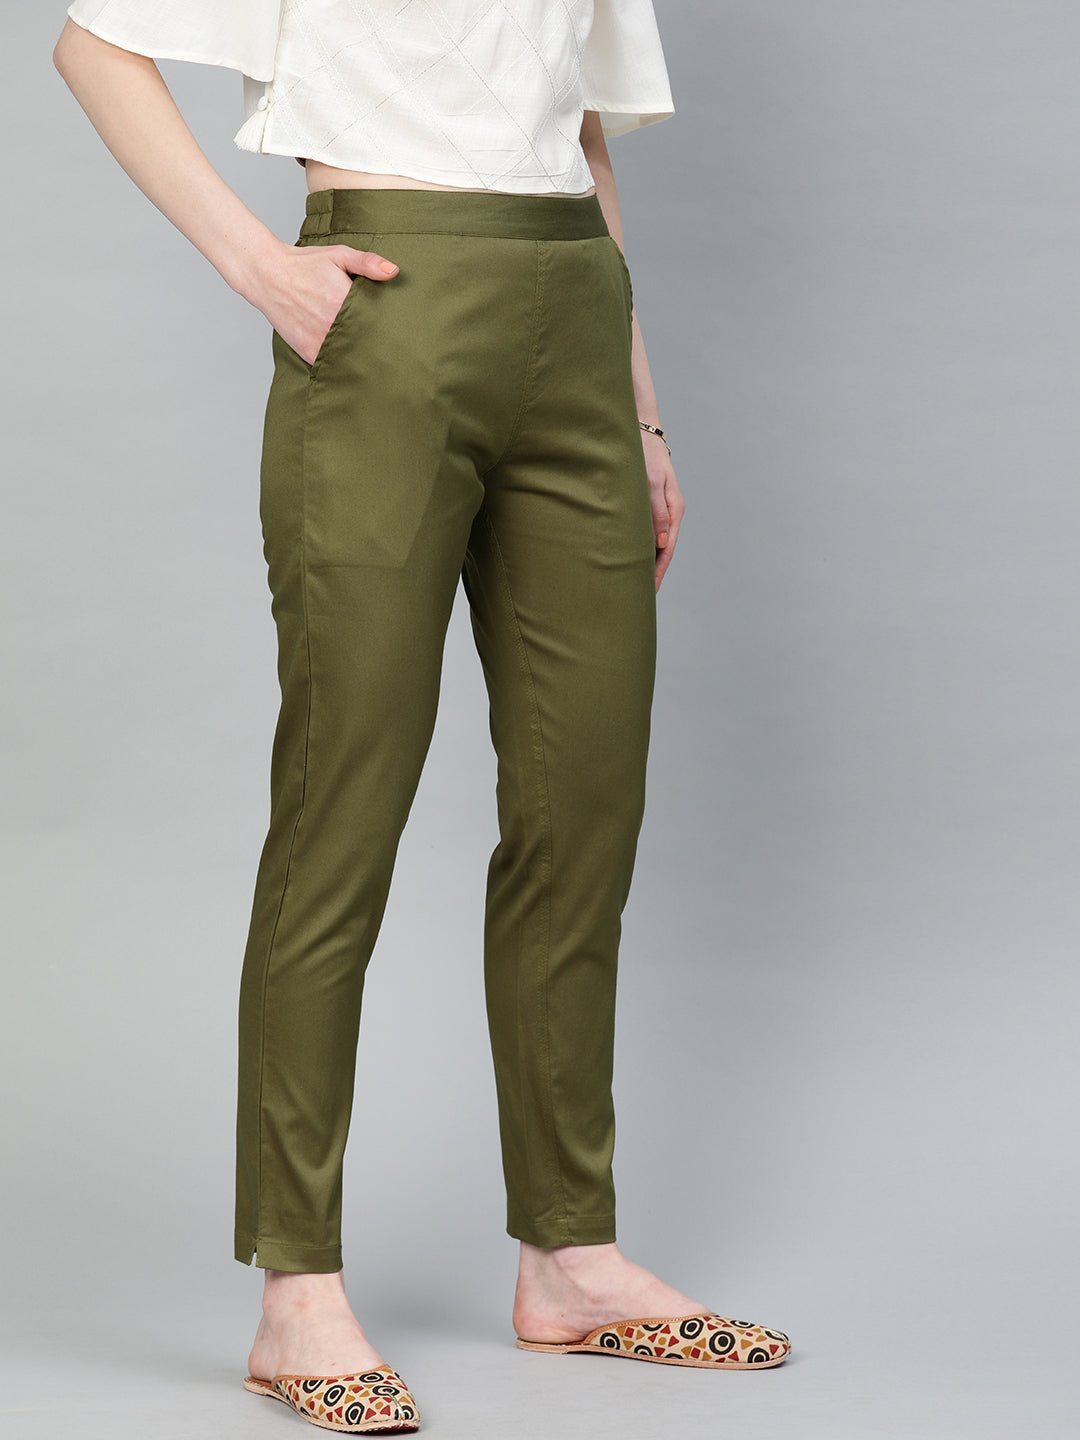 Buy Multicoloured Cotton Lycra Trousers Capris For Women Online In India At  Discounted Prices